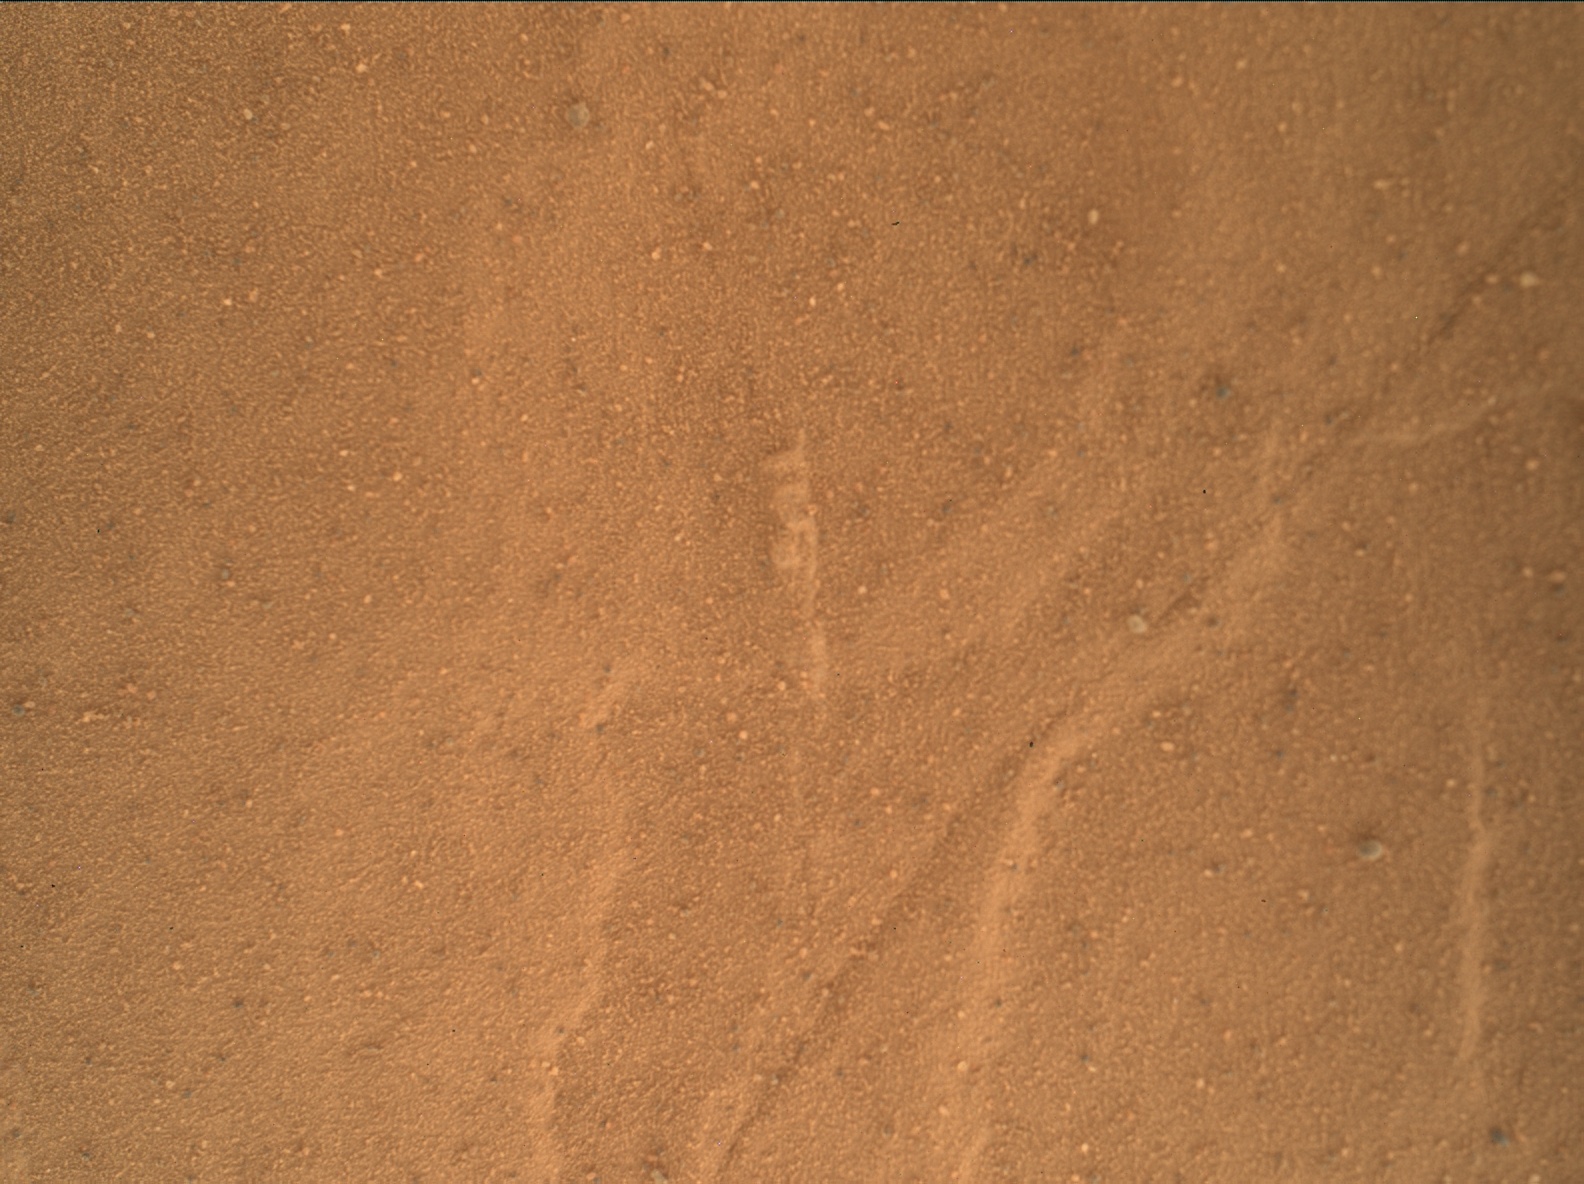 Nasa's Mars rover Curiosity acquired this image using its Mars Hand Lens Imager (MAHLI) on Sol 1788